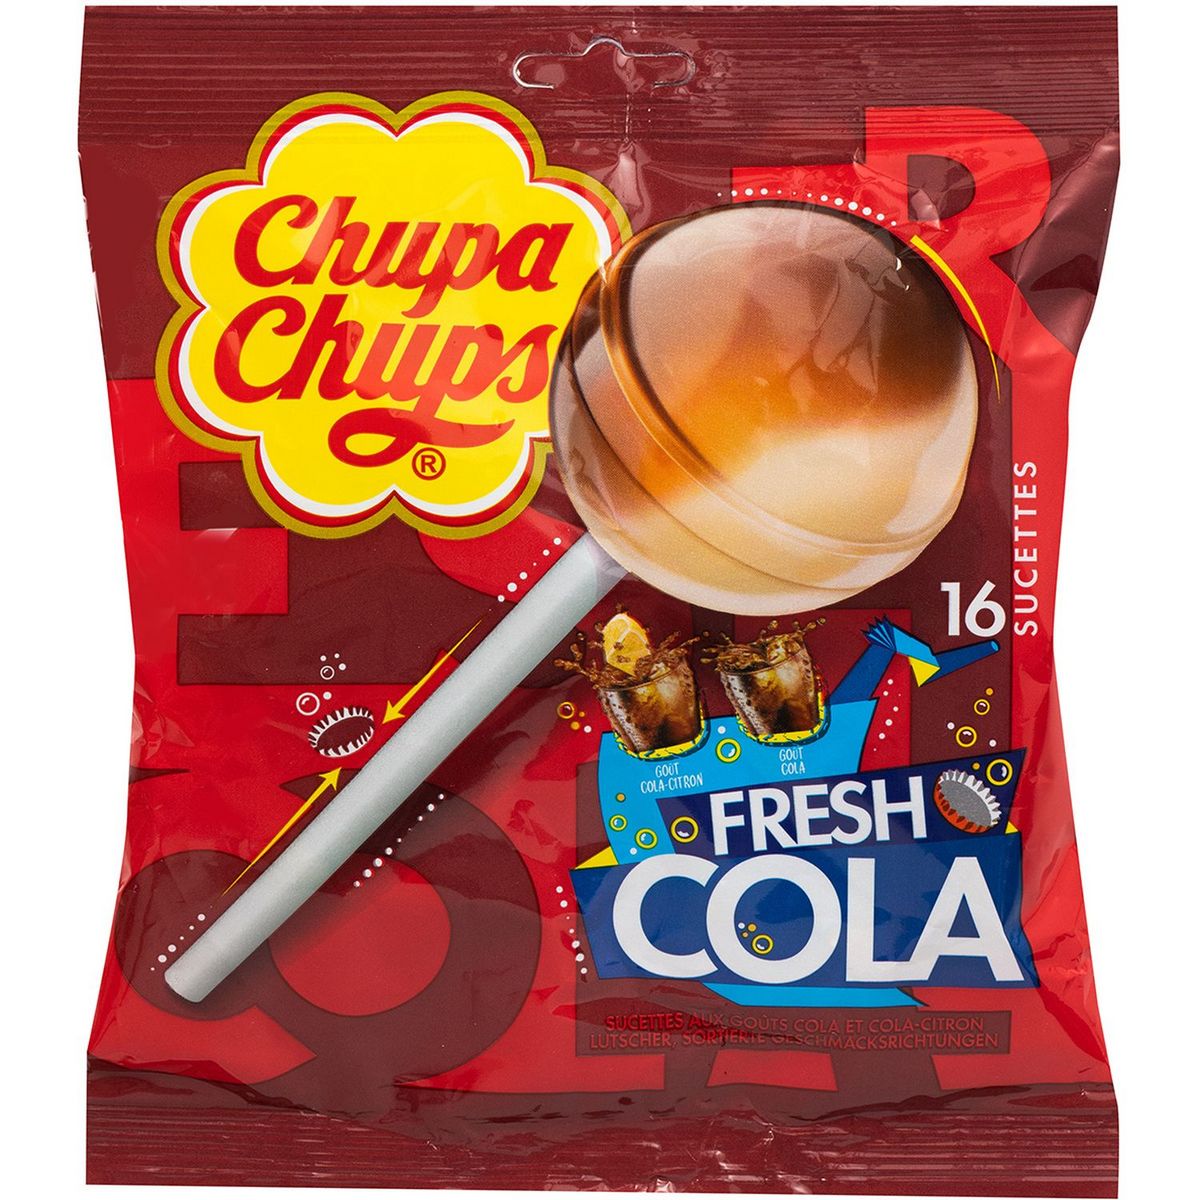 Chupa Chups Bonbons sucettes The Best Of 